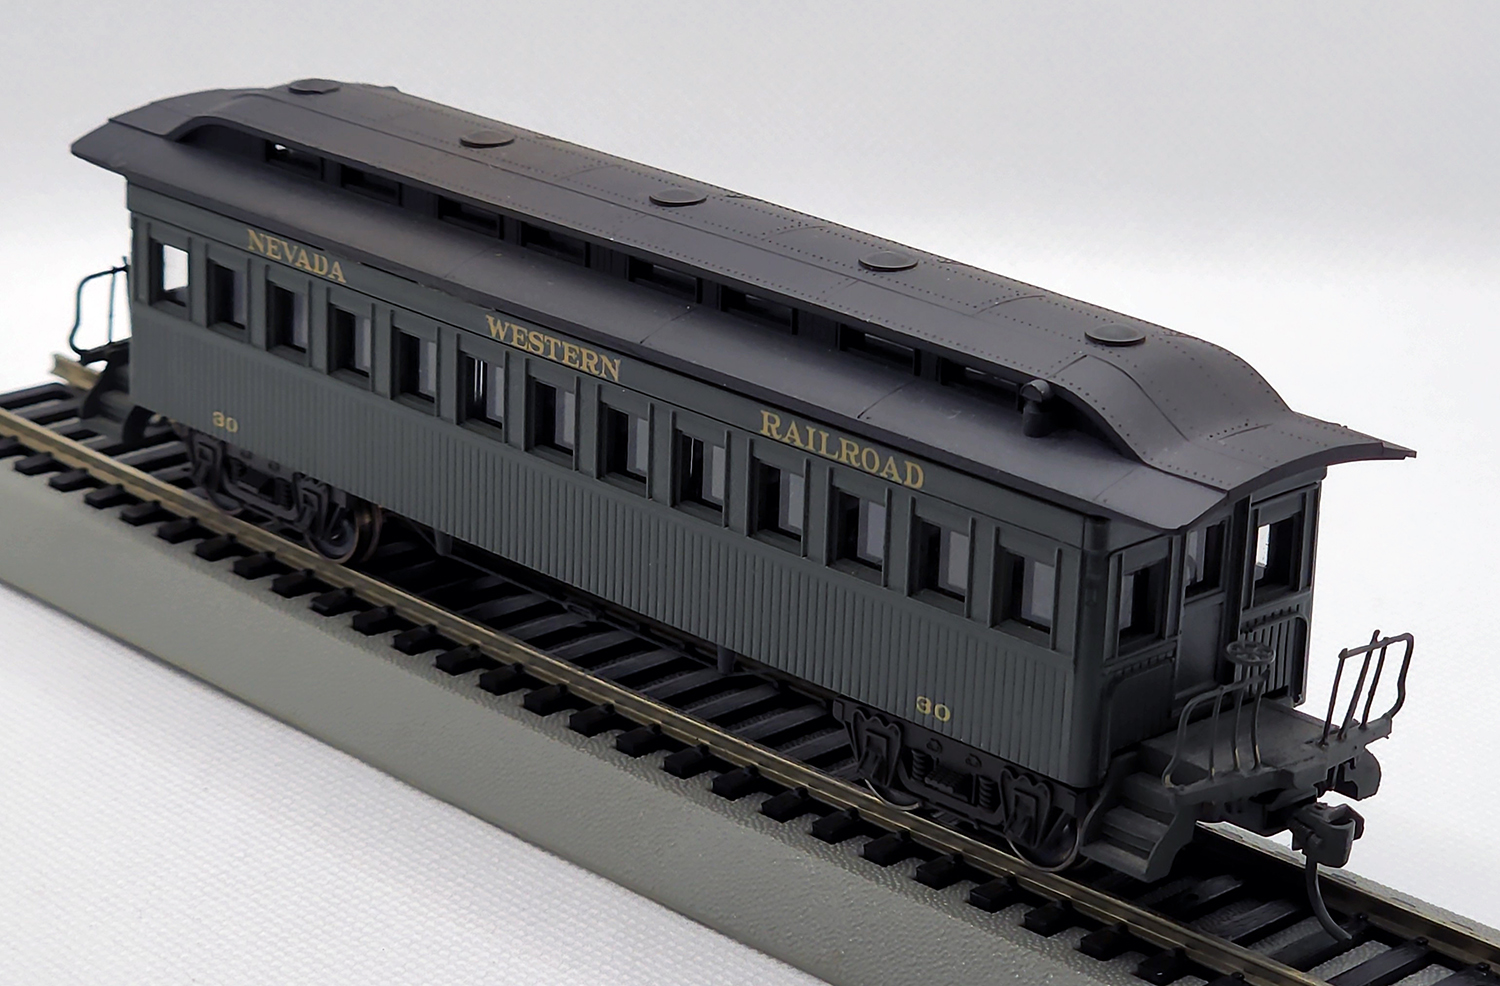 6th view of the Unbranded Nevada Western Railroad Passenger Coach #30 in my HO-scale Collection